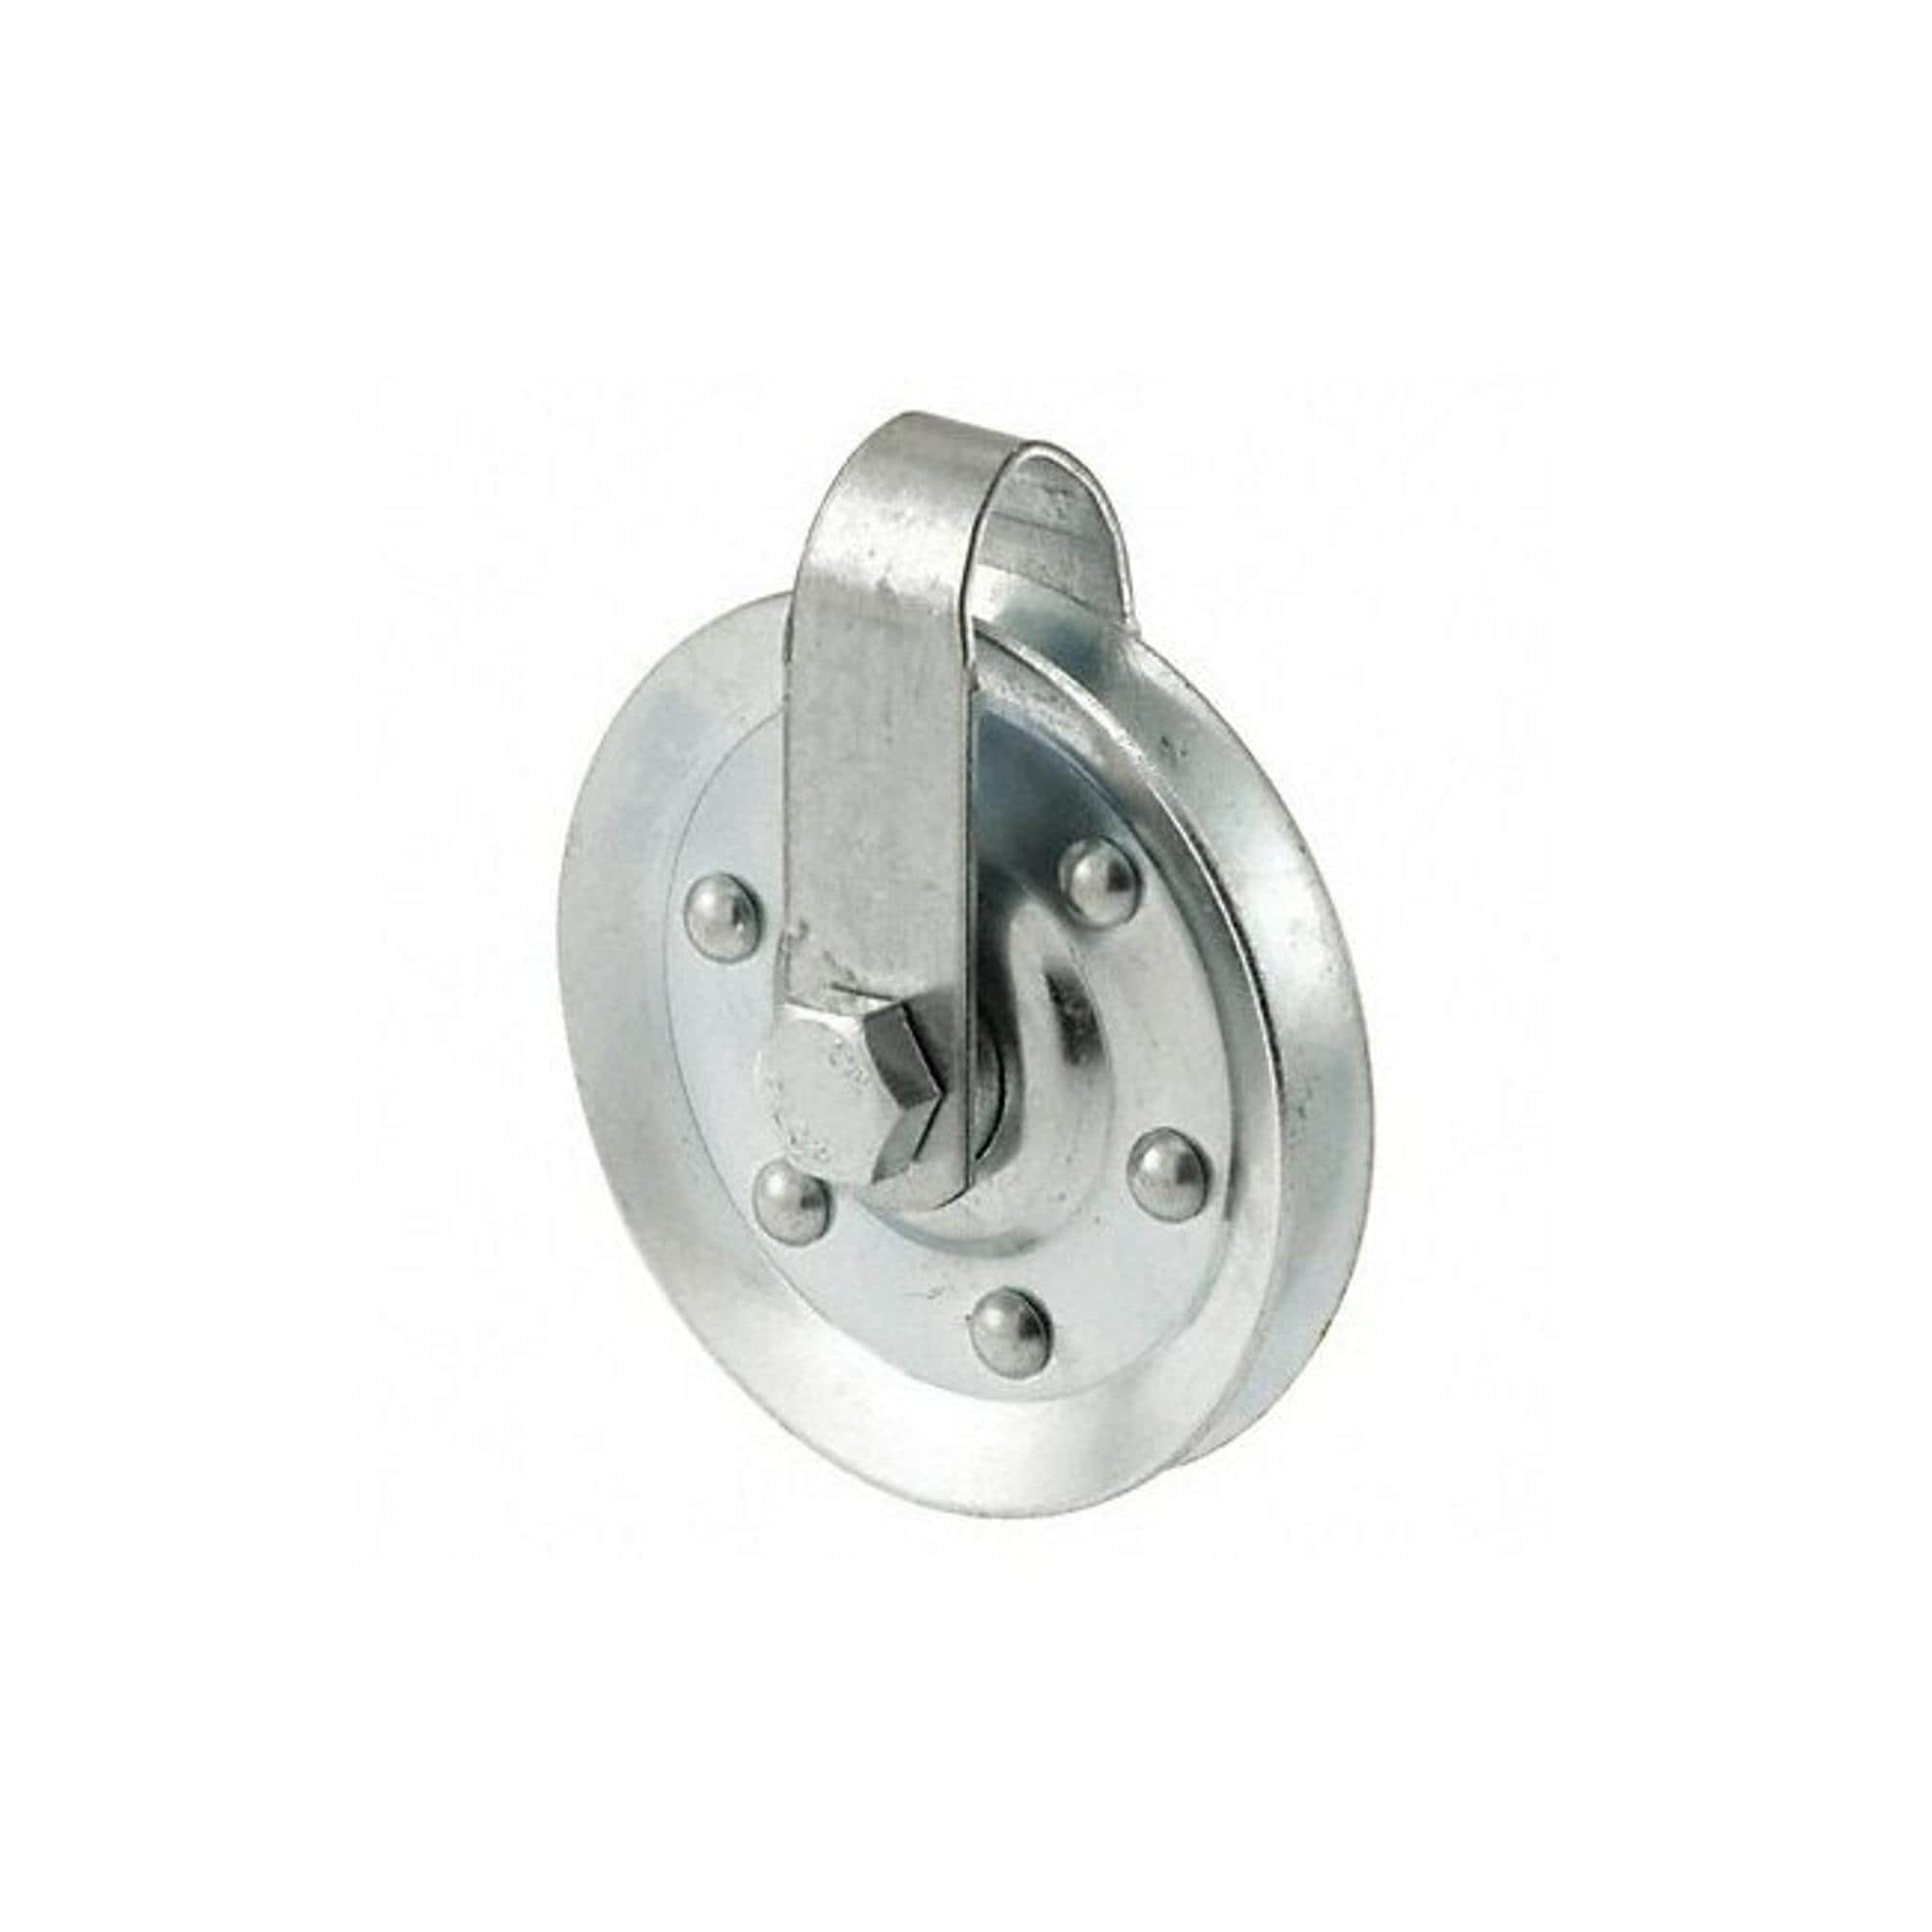 Primeline Tools Pulley Strap and Bolt,Steel,Silver,PR GD 52189 - 1 Each